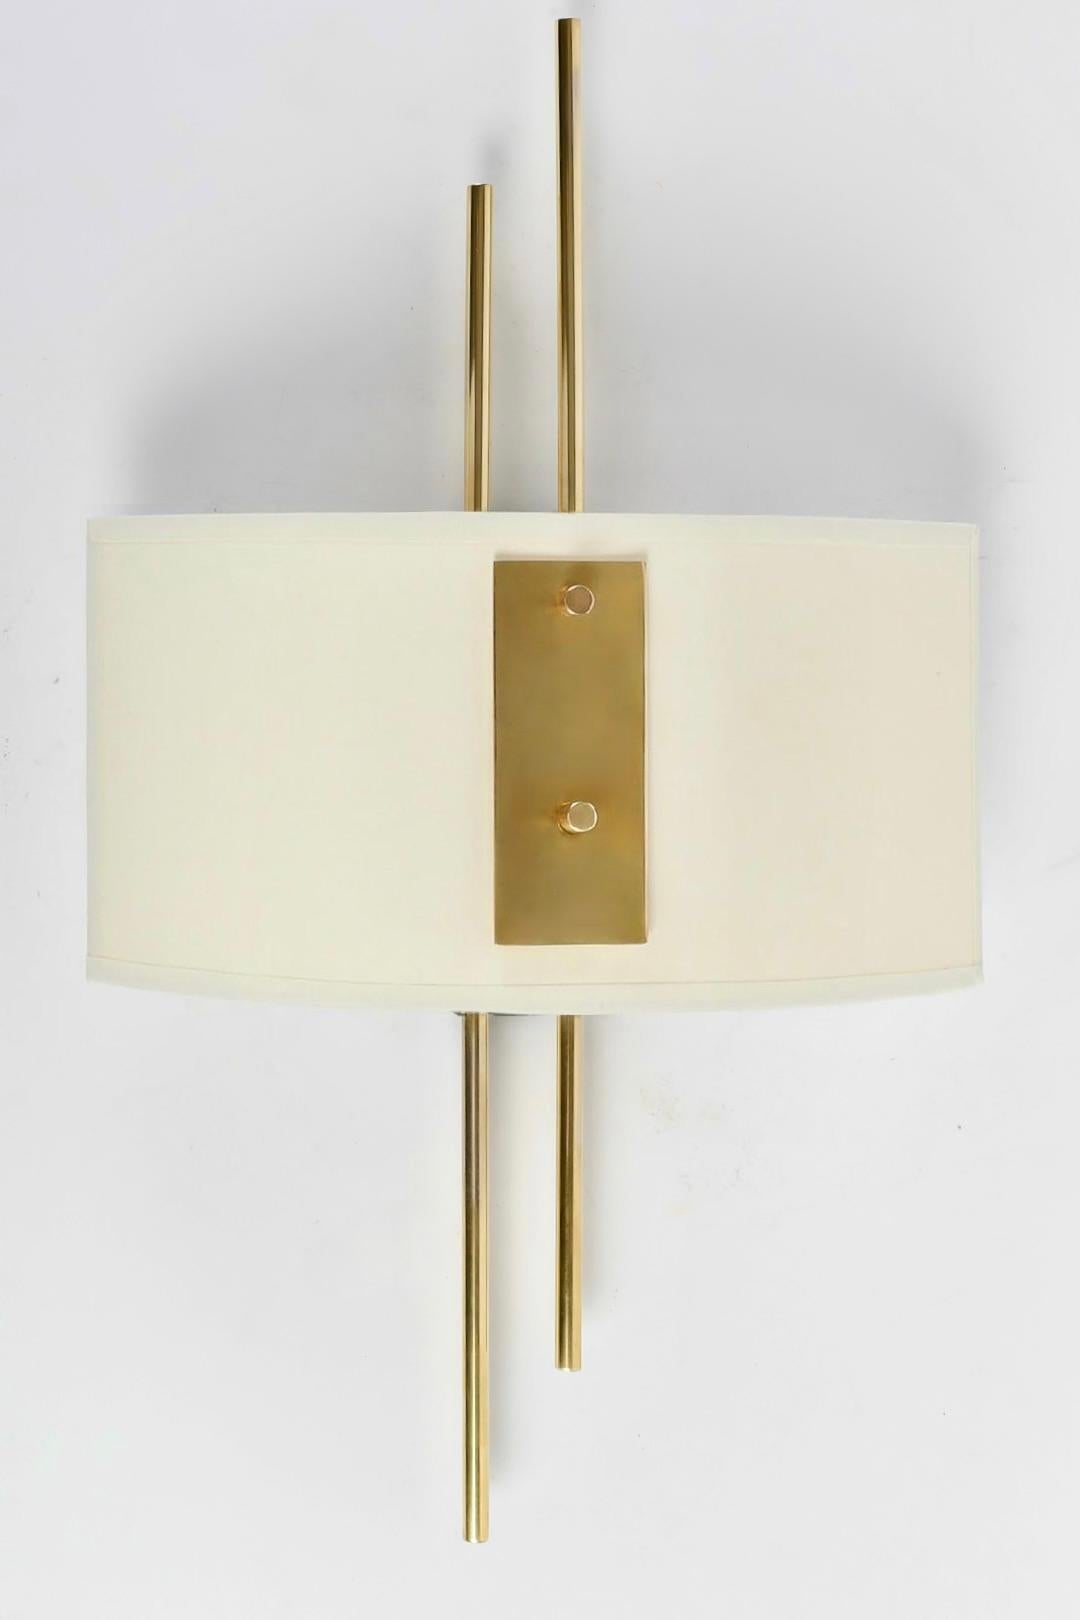 Composed of a wall support of rectangular shape in black wrought iron on which are placed two golden brass rods of round section placed vertically at two different heights.

On the front, they are dressed with a lampshade in the form of a perspex